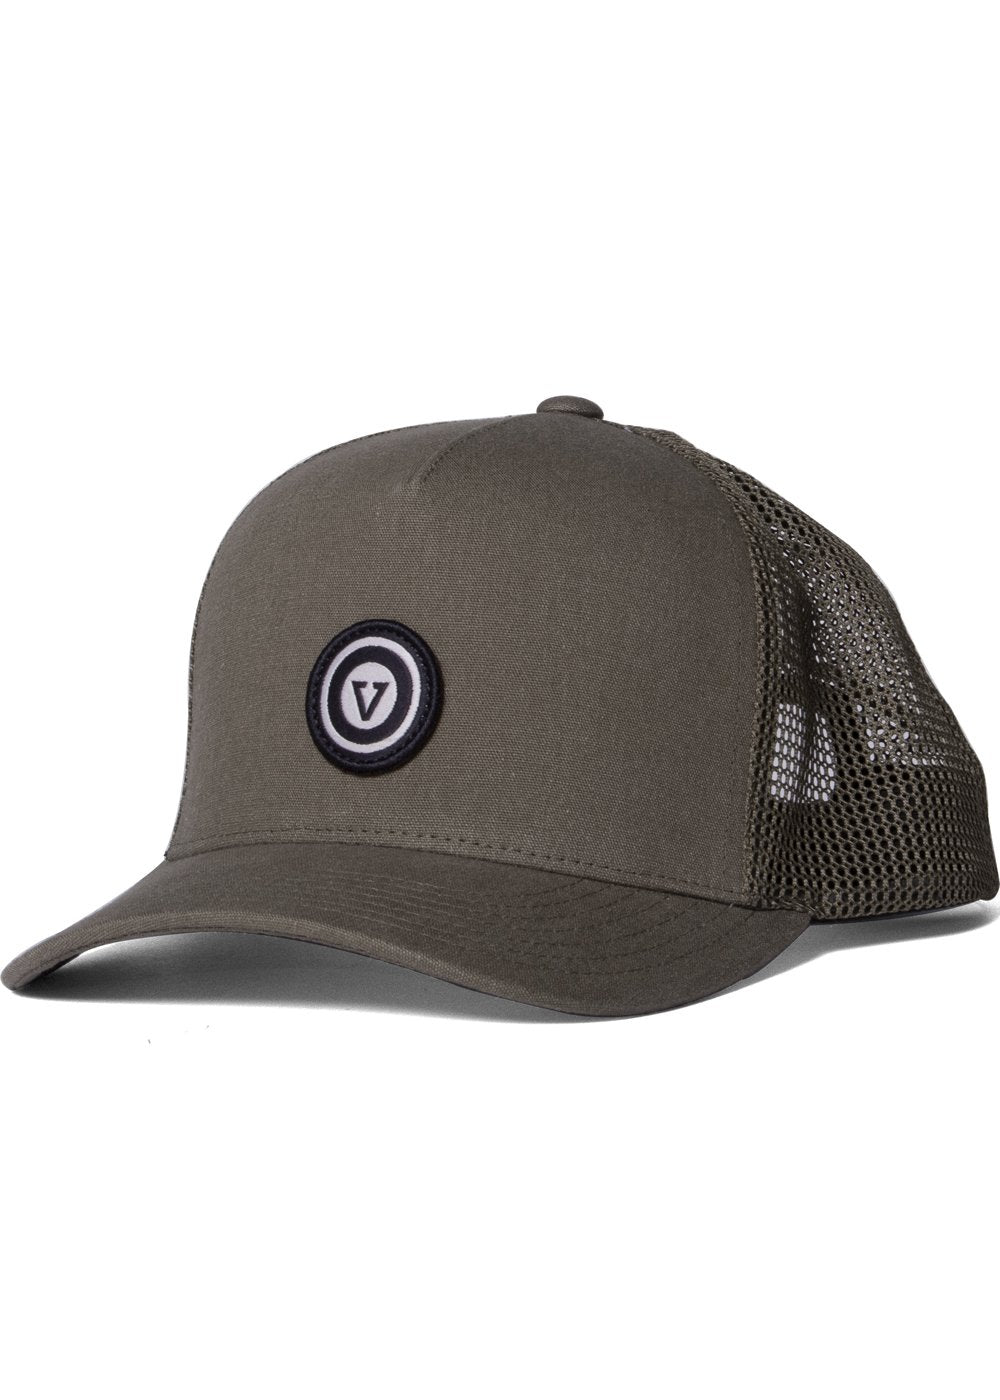 Trip Out Eco Trucker Hat, KAN